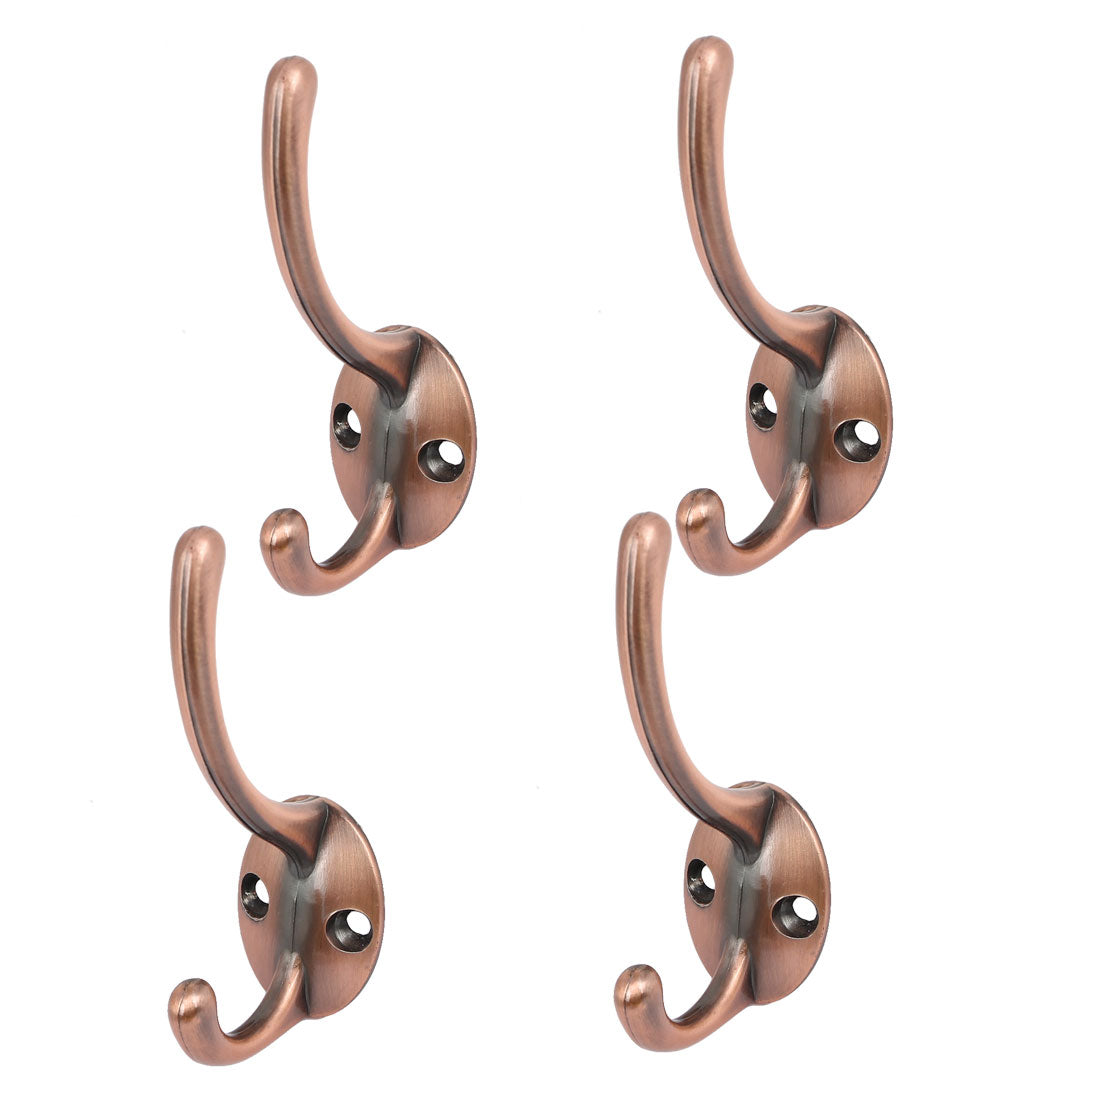 uxcell Uxcell Bedroom Robe Towel Hanging Vintage Style Double Hanger Hooks Copper Tone 4pcs